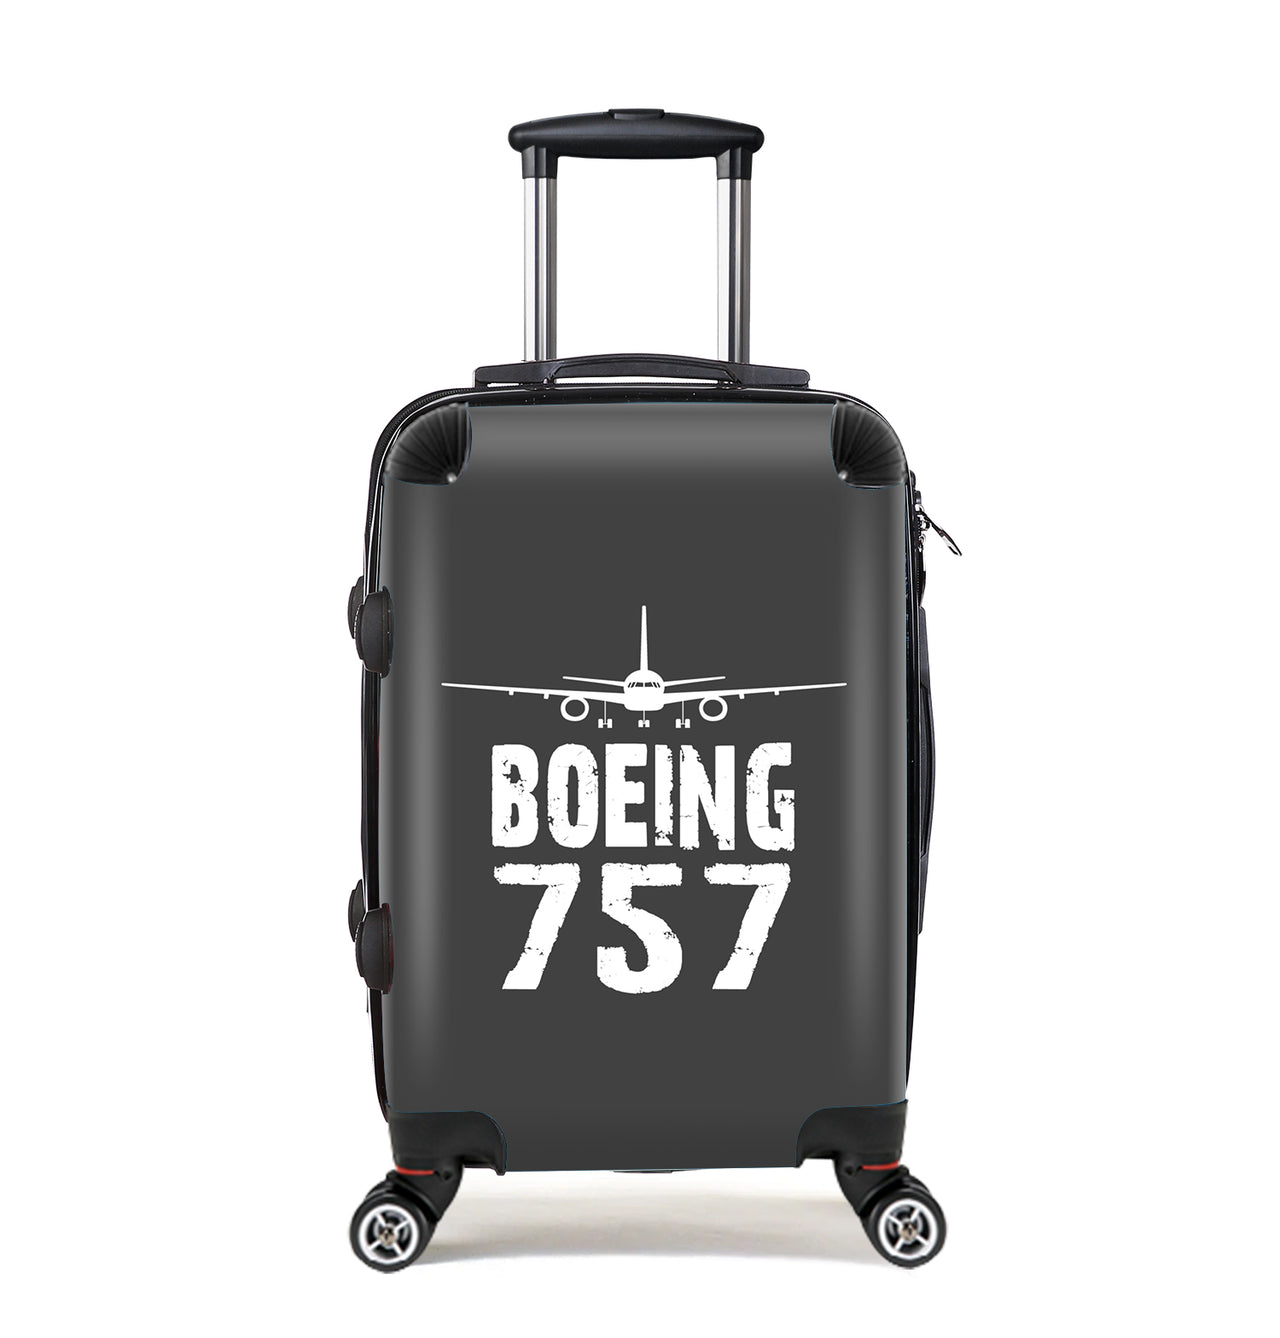 Boeing 757 & Plane Designed Cabin Size Luggages